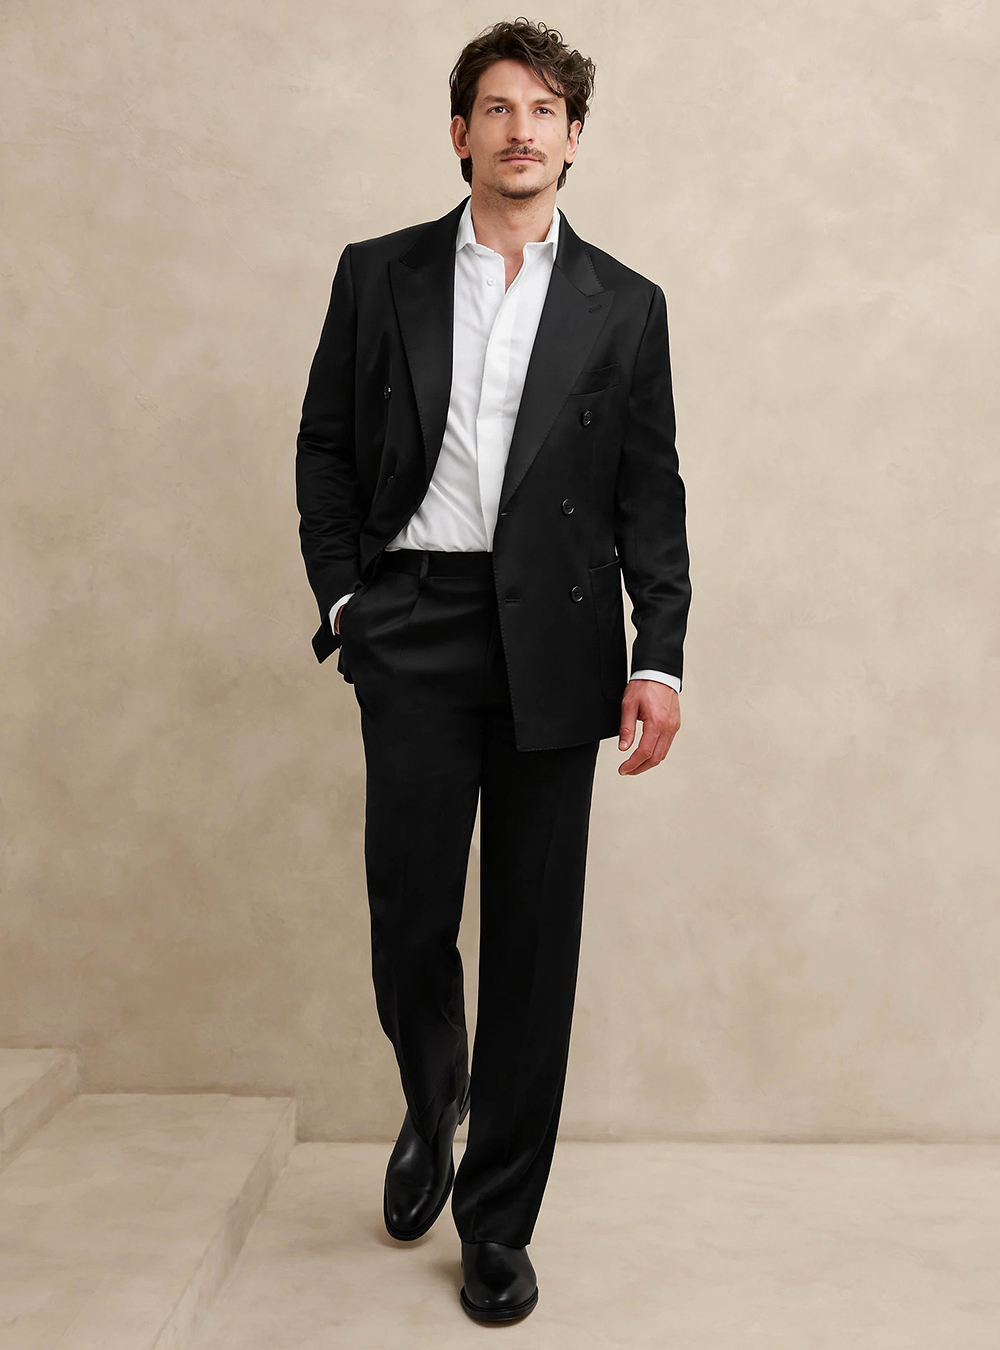 black double-breasted suit, white dress shirt, and black leather Chelsea boots